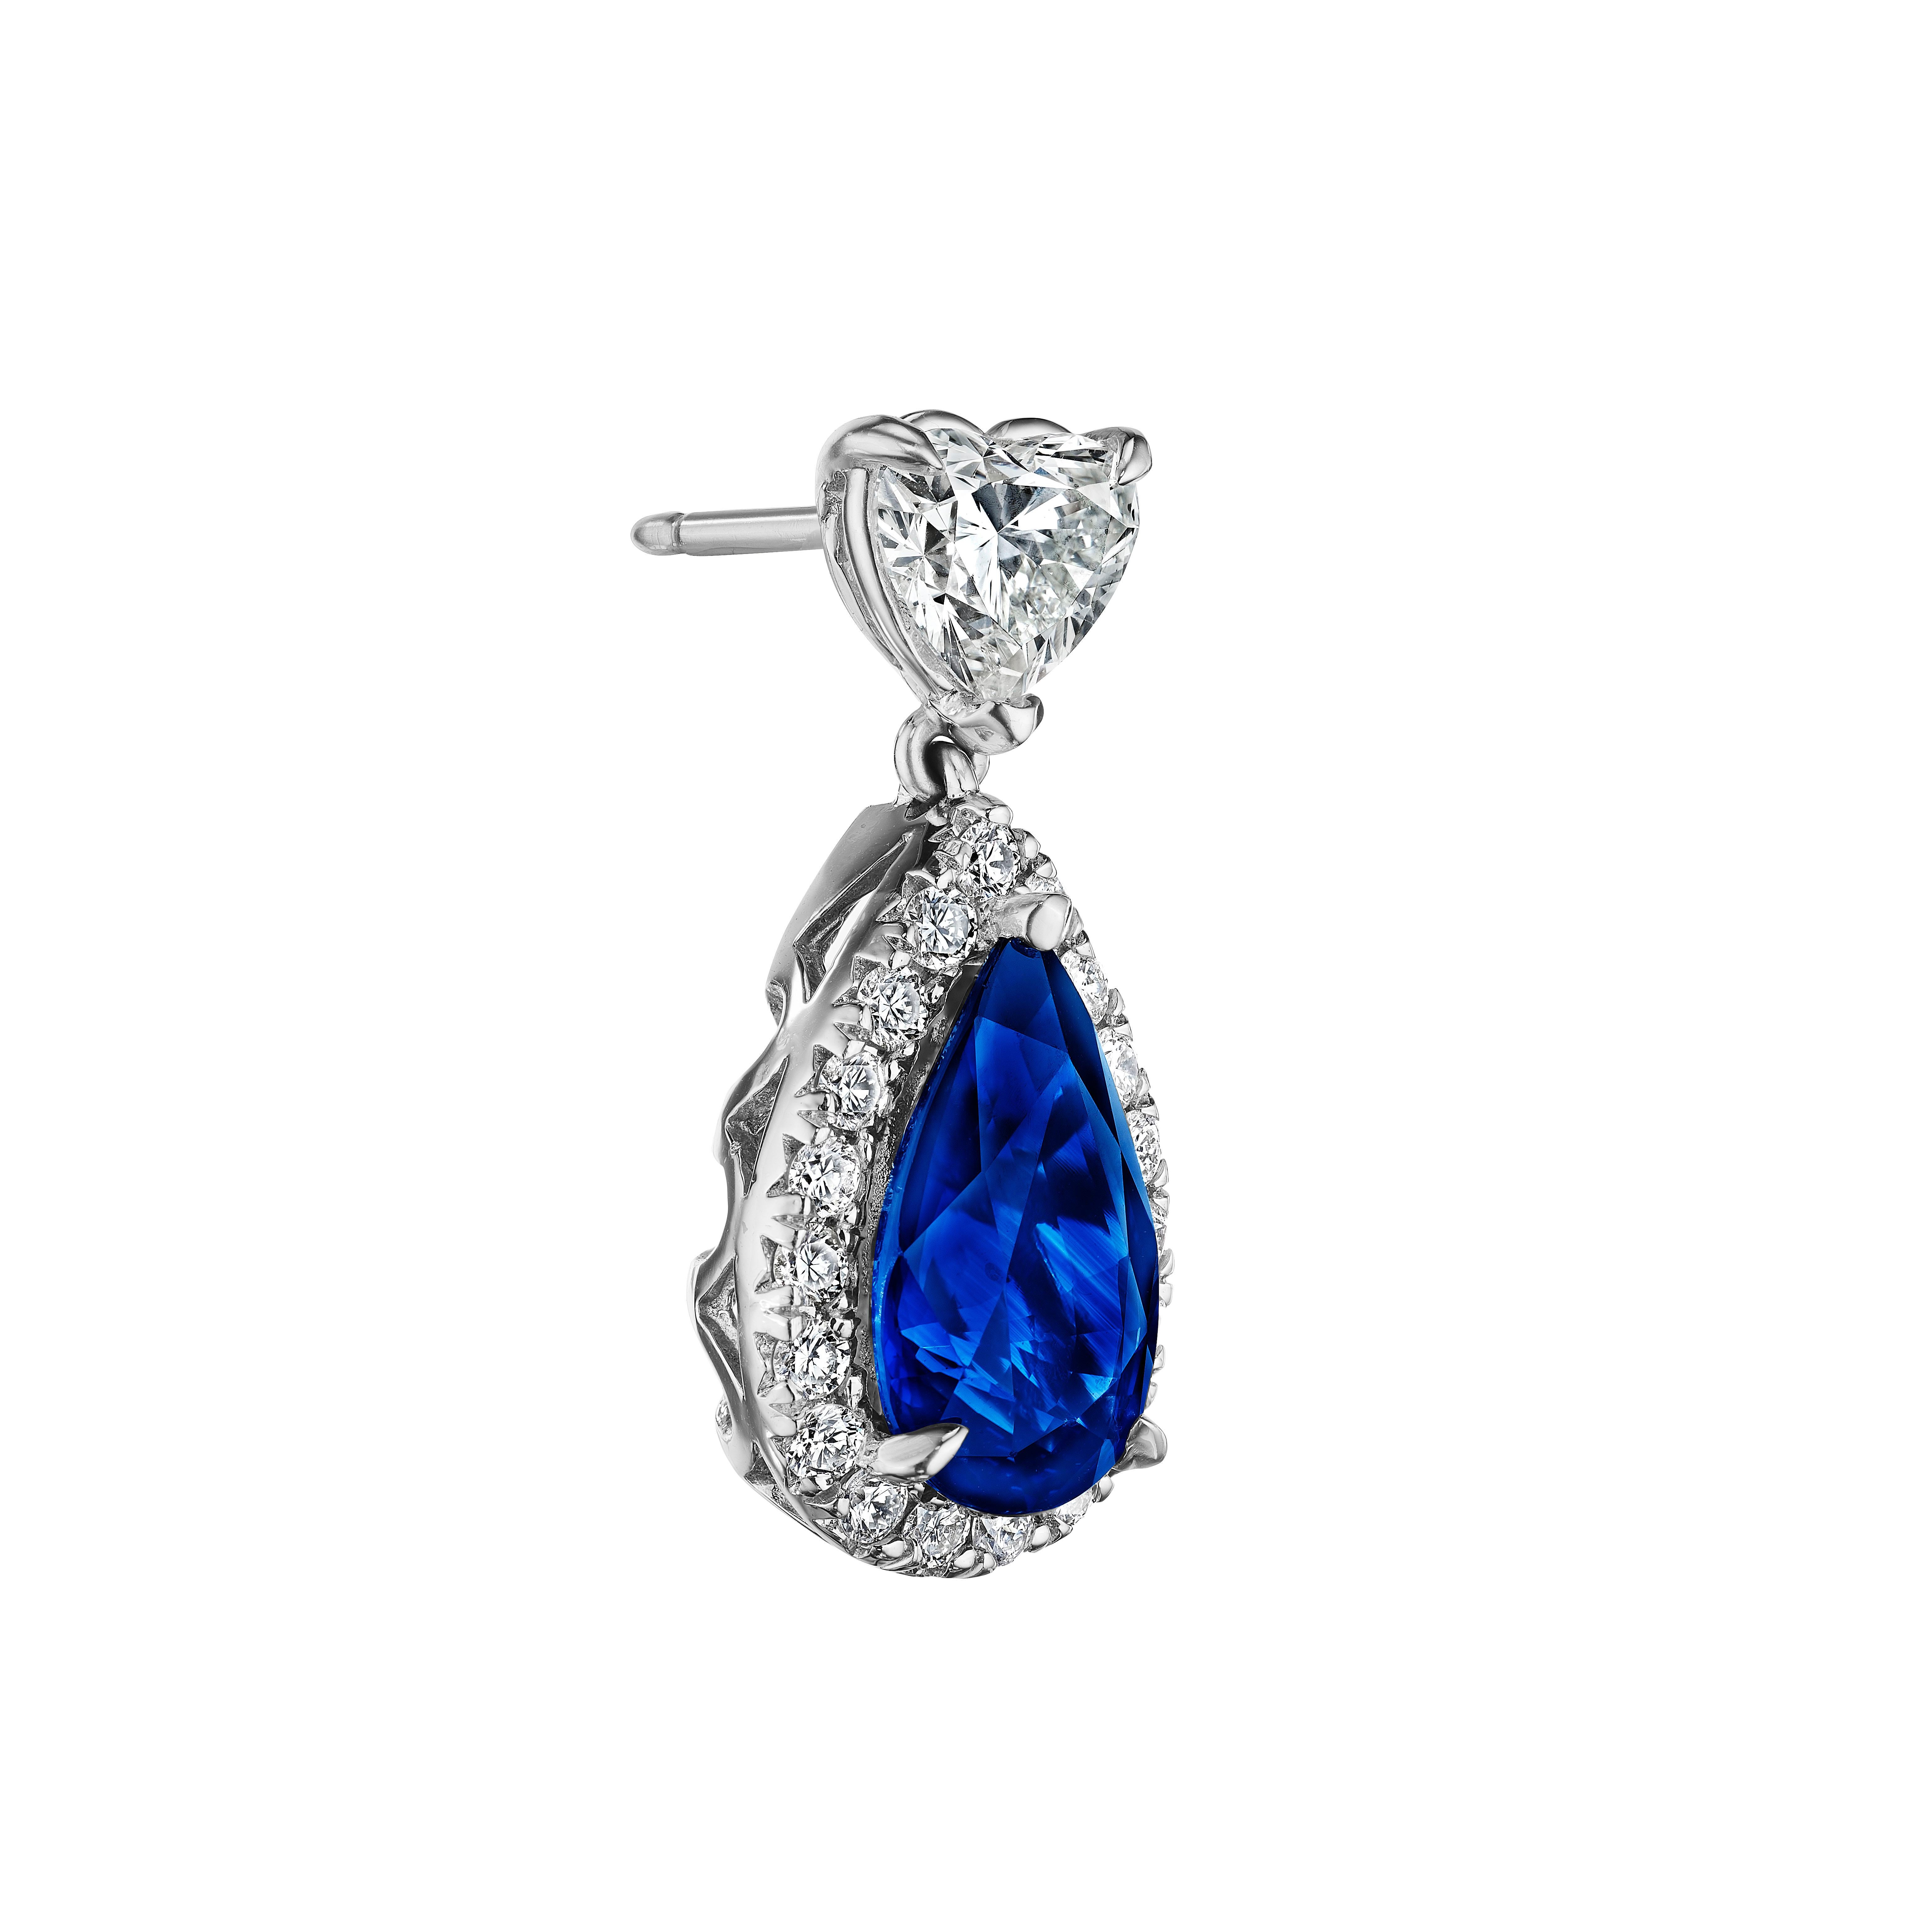 •	18KT White Gold
•	9.18 carats
•	Sold as a pair 

•	Number of Pear Shape Sapphires: 2
•	Carat Weight: 7.09ctw

•	Number of Heart Shape Diamonds: 2
•	Carat Weight: 1.46ctw

•	Number of Round Diamonds: 38
•	Carat Weight: 0.63ctw

•	This pair of